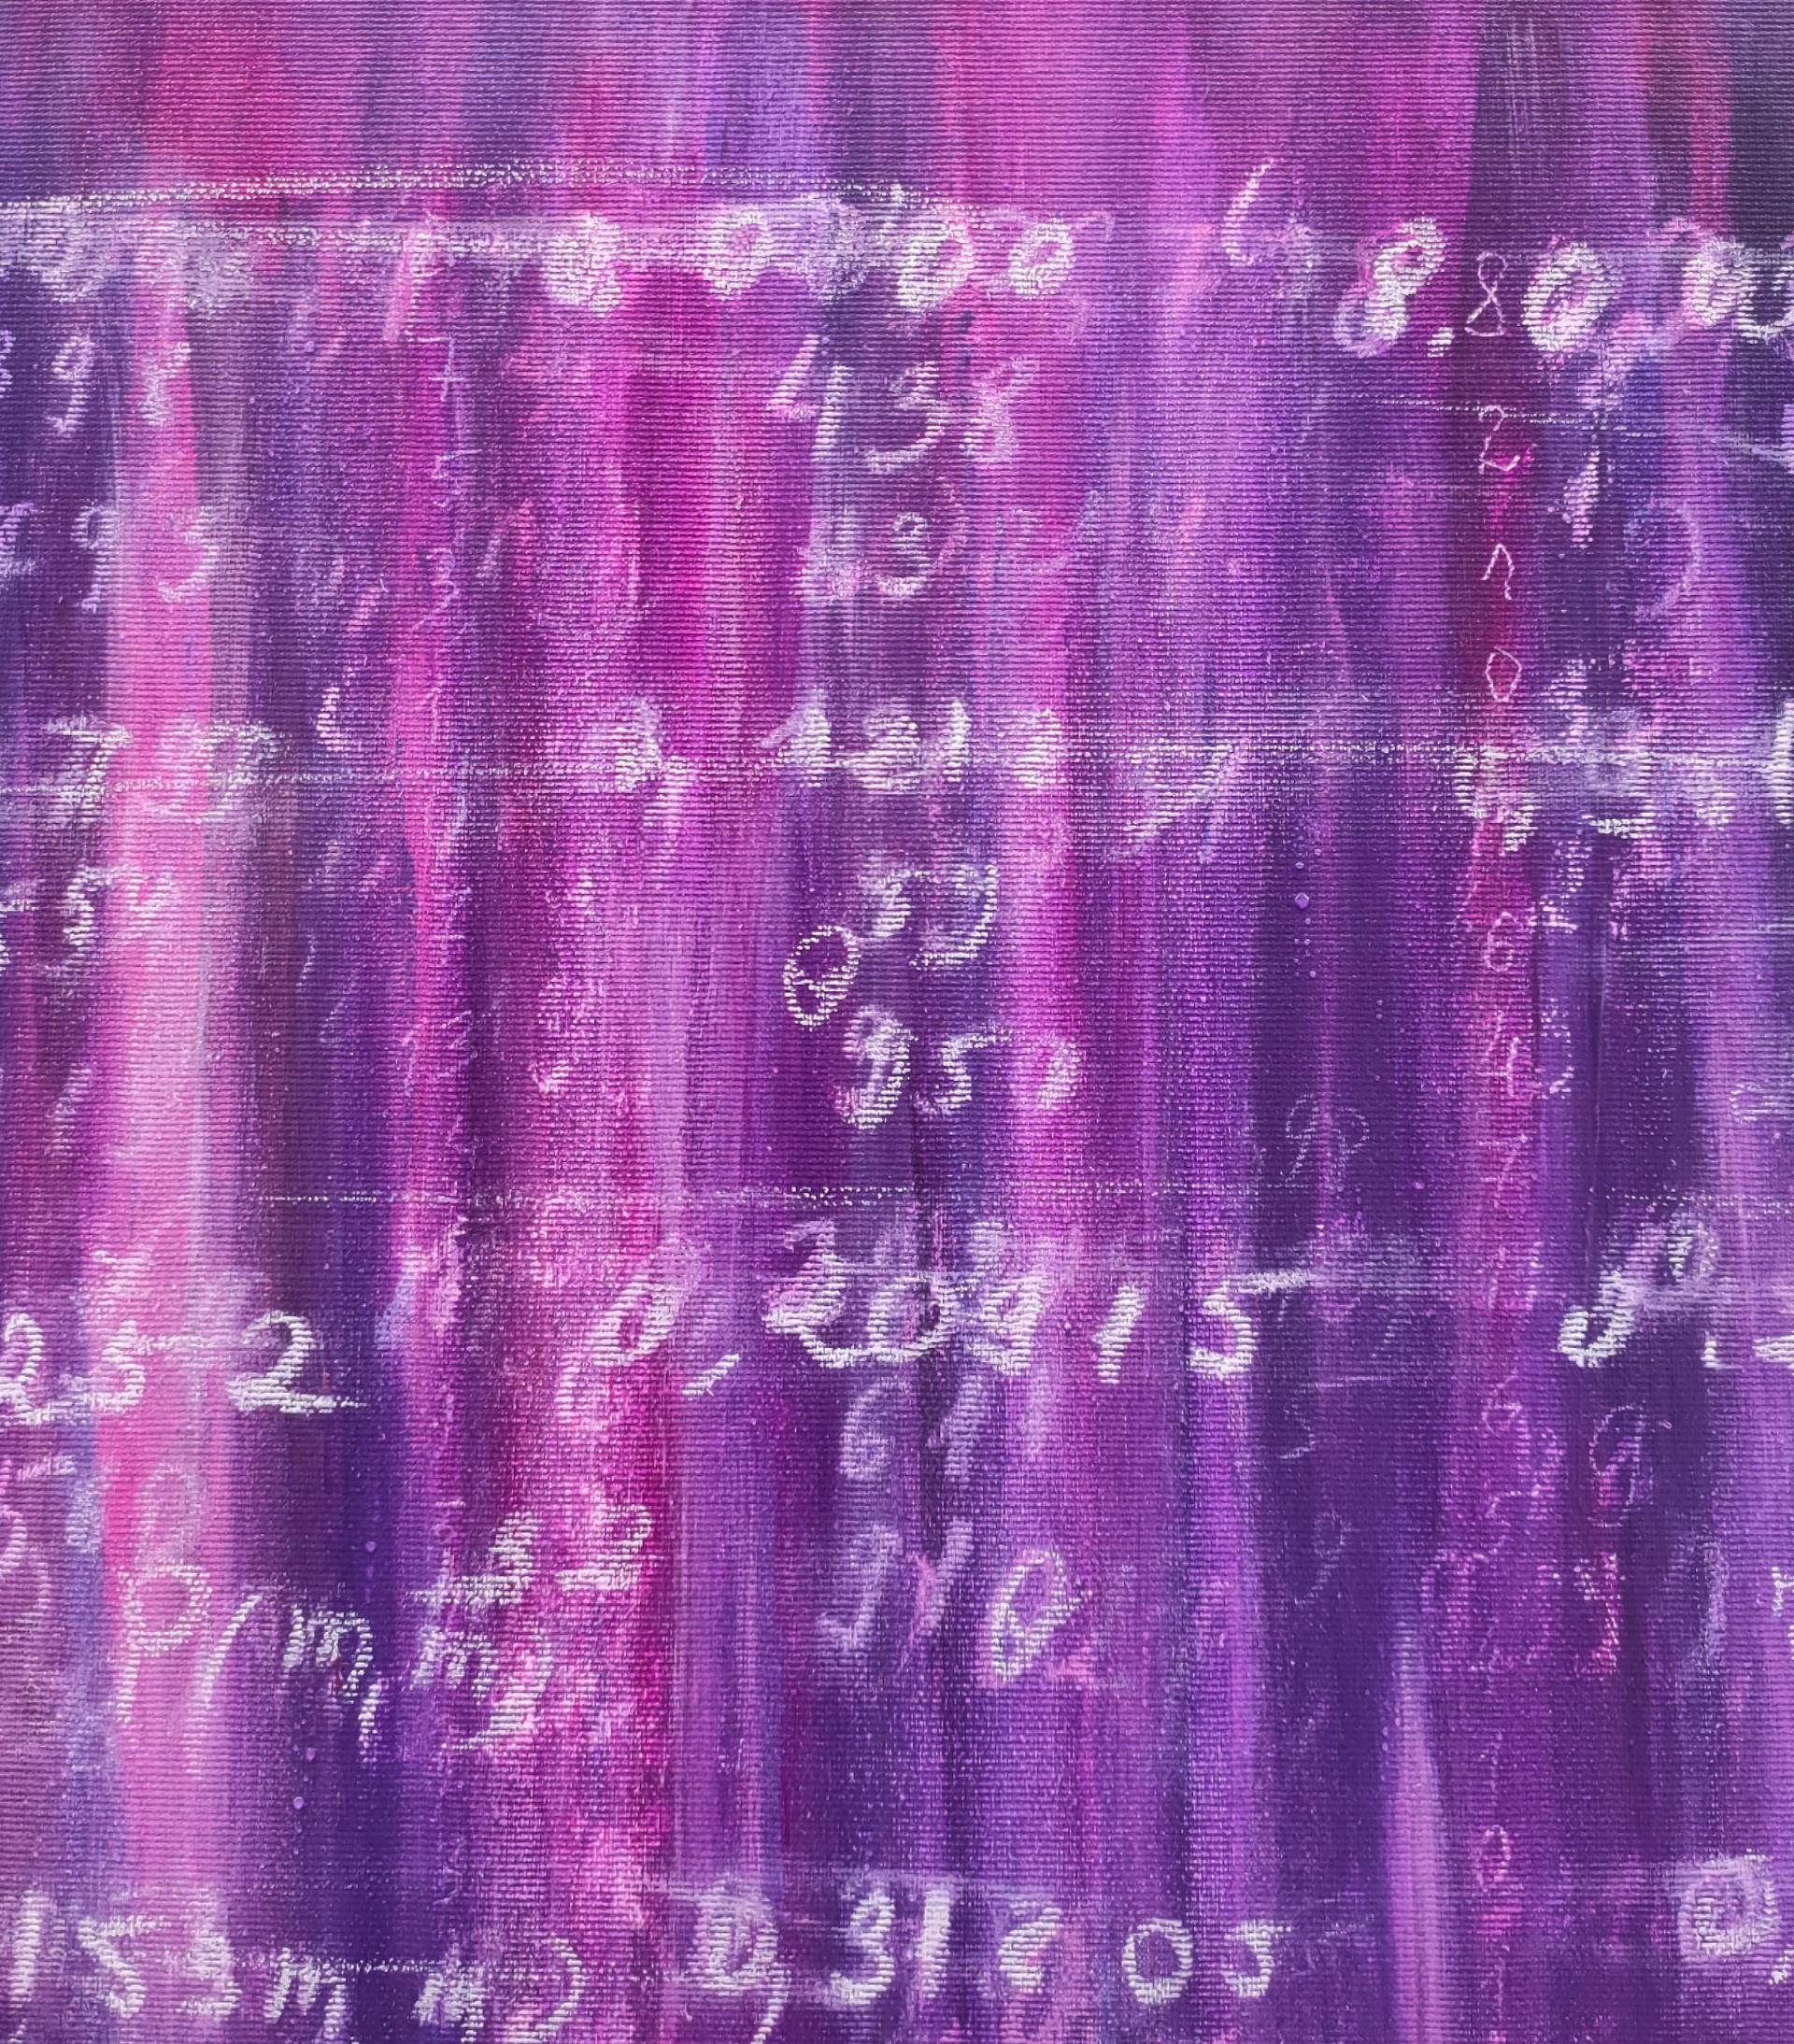 Purple abstraction with numbers, Science Art Collection Conceptual painting - Painting by Anastasia Vasilyeva